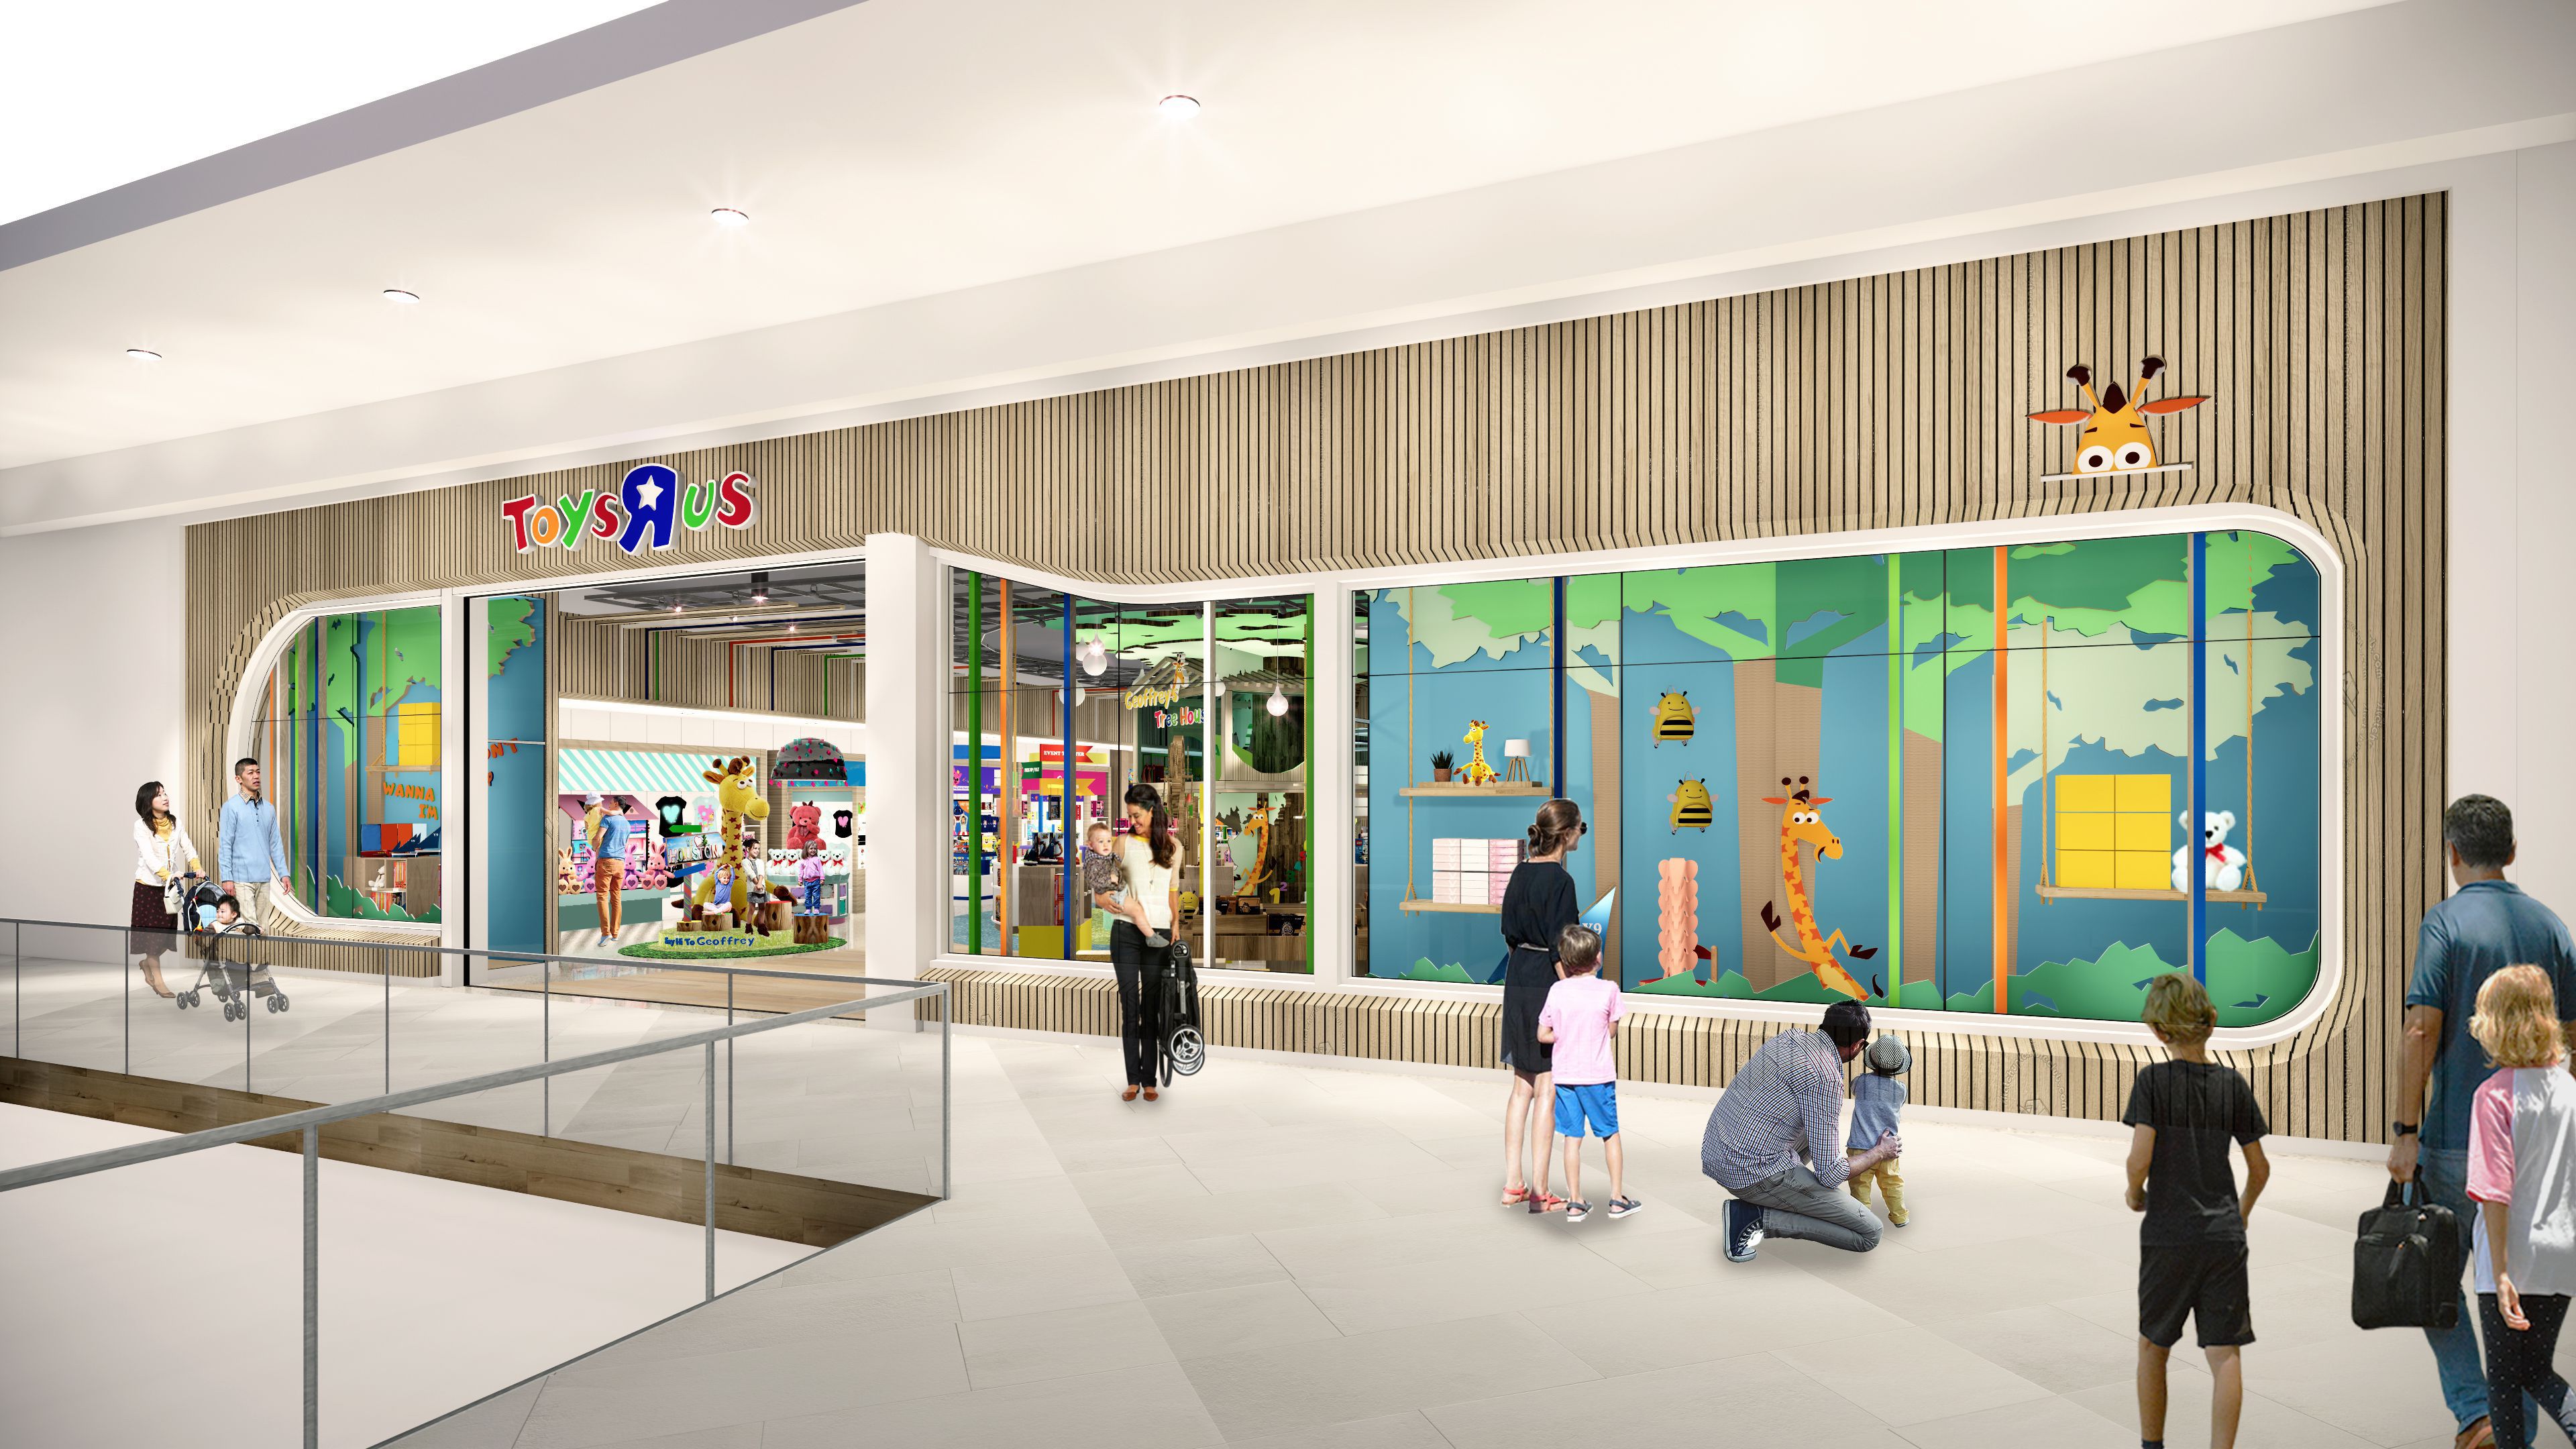 Food court, play space at Westfield Garden State Plaza gets a makeover